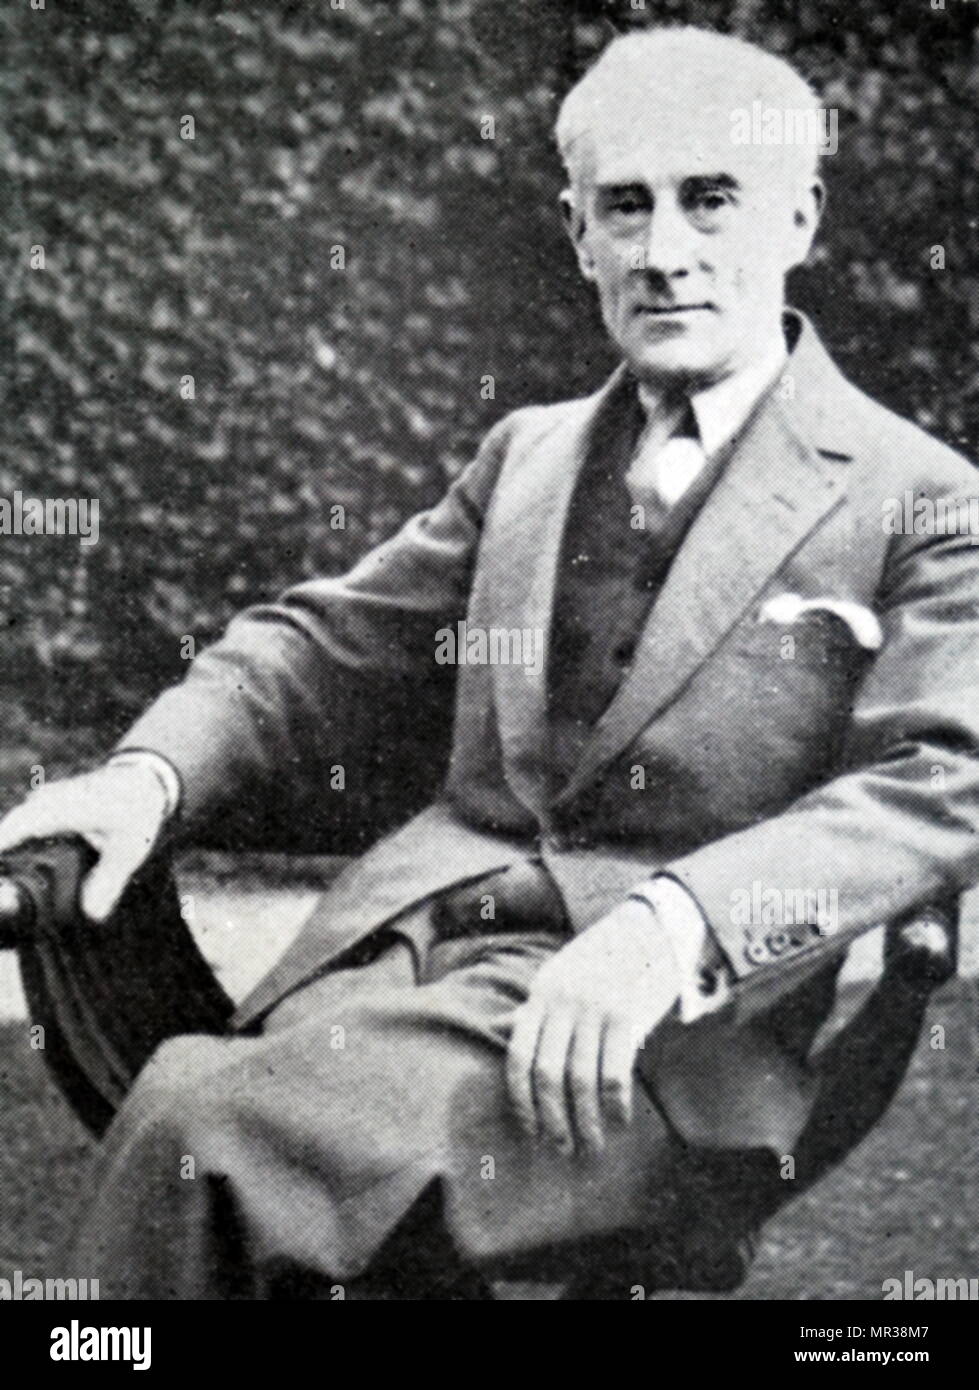 Photographic portrait of Maurice Ravel (1875-1937) a French composer, pianist and conductor. Dated 20th century Stock Photo